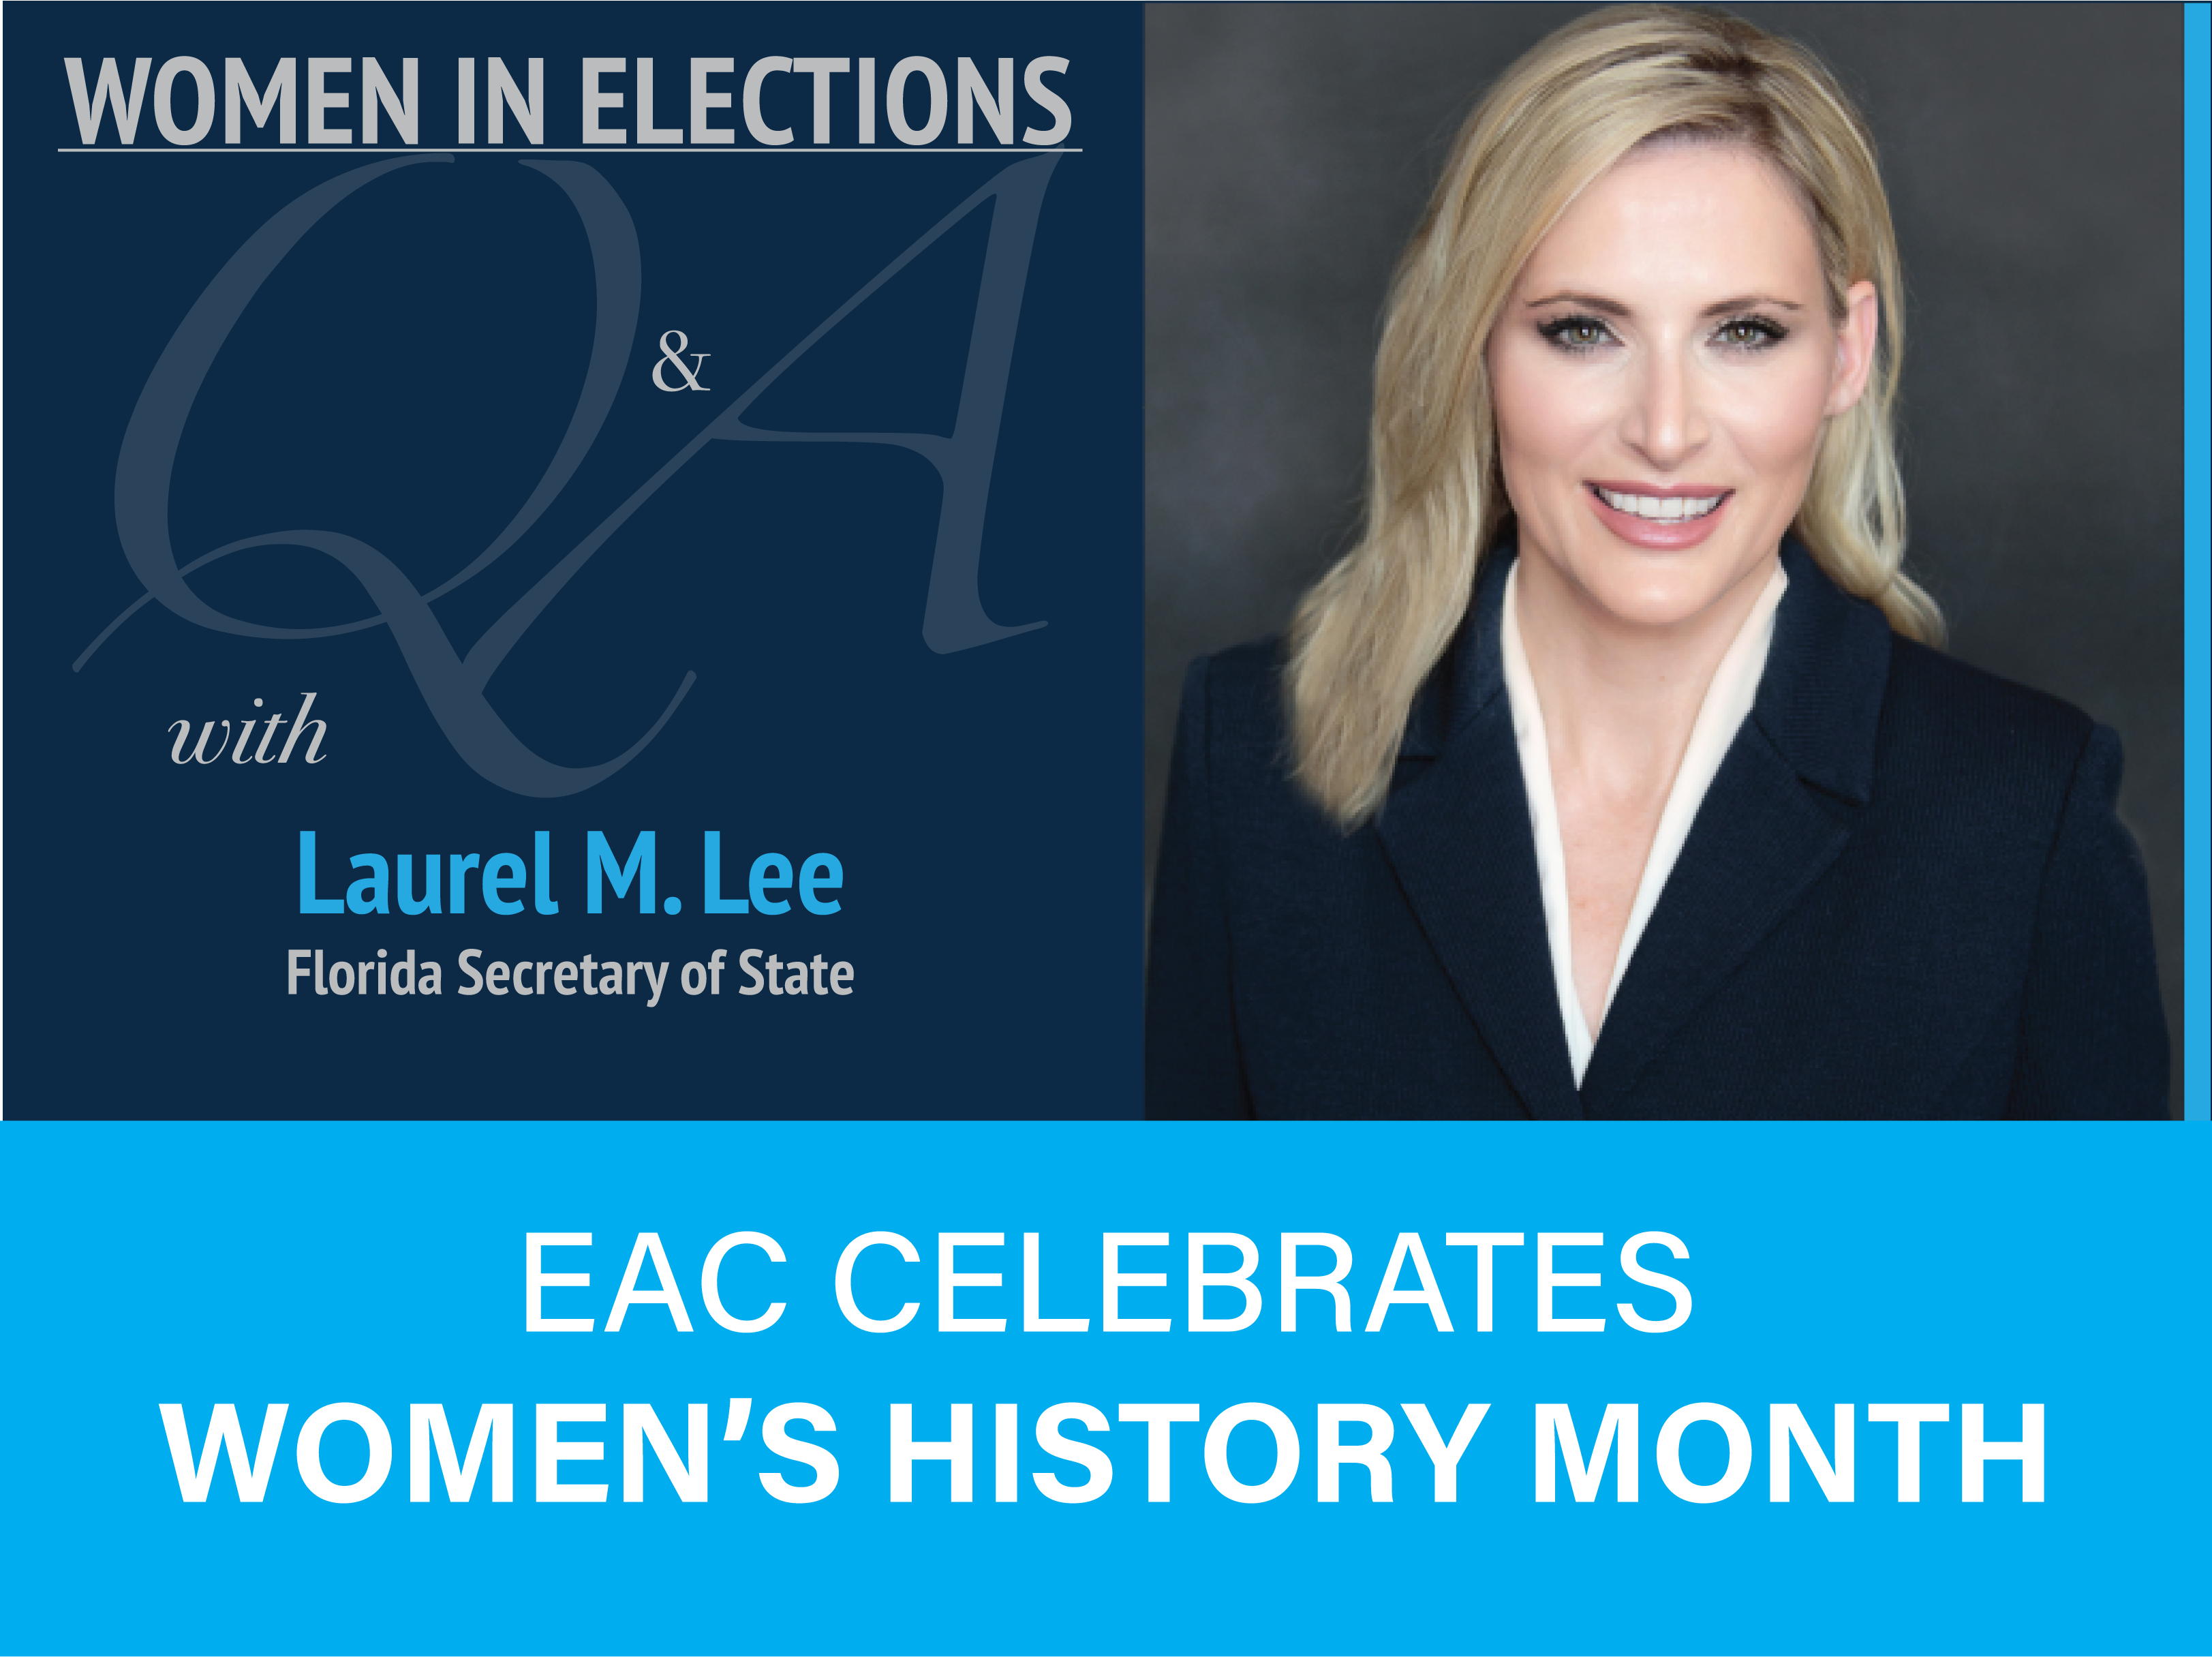 Women in Elections Q and A Series with Laurel M. Lee Florida Secretary of State. EAC Celebrates Women's History Month